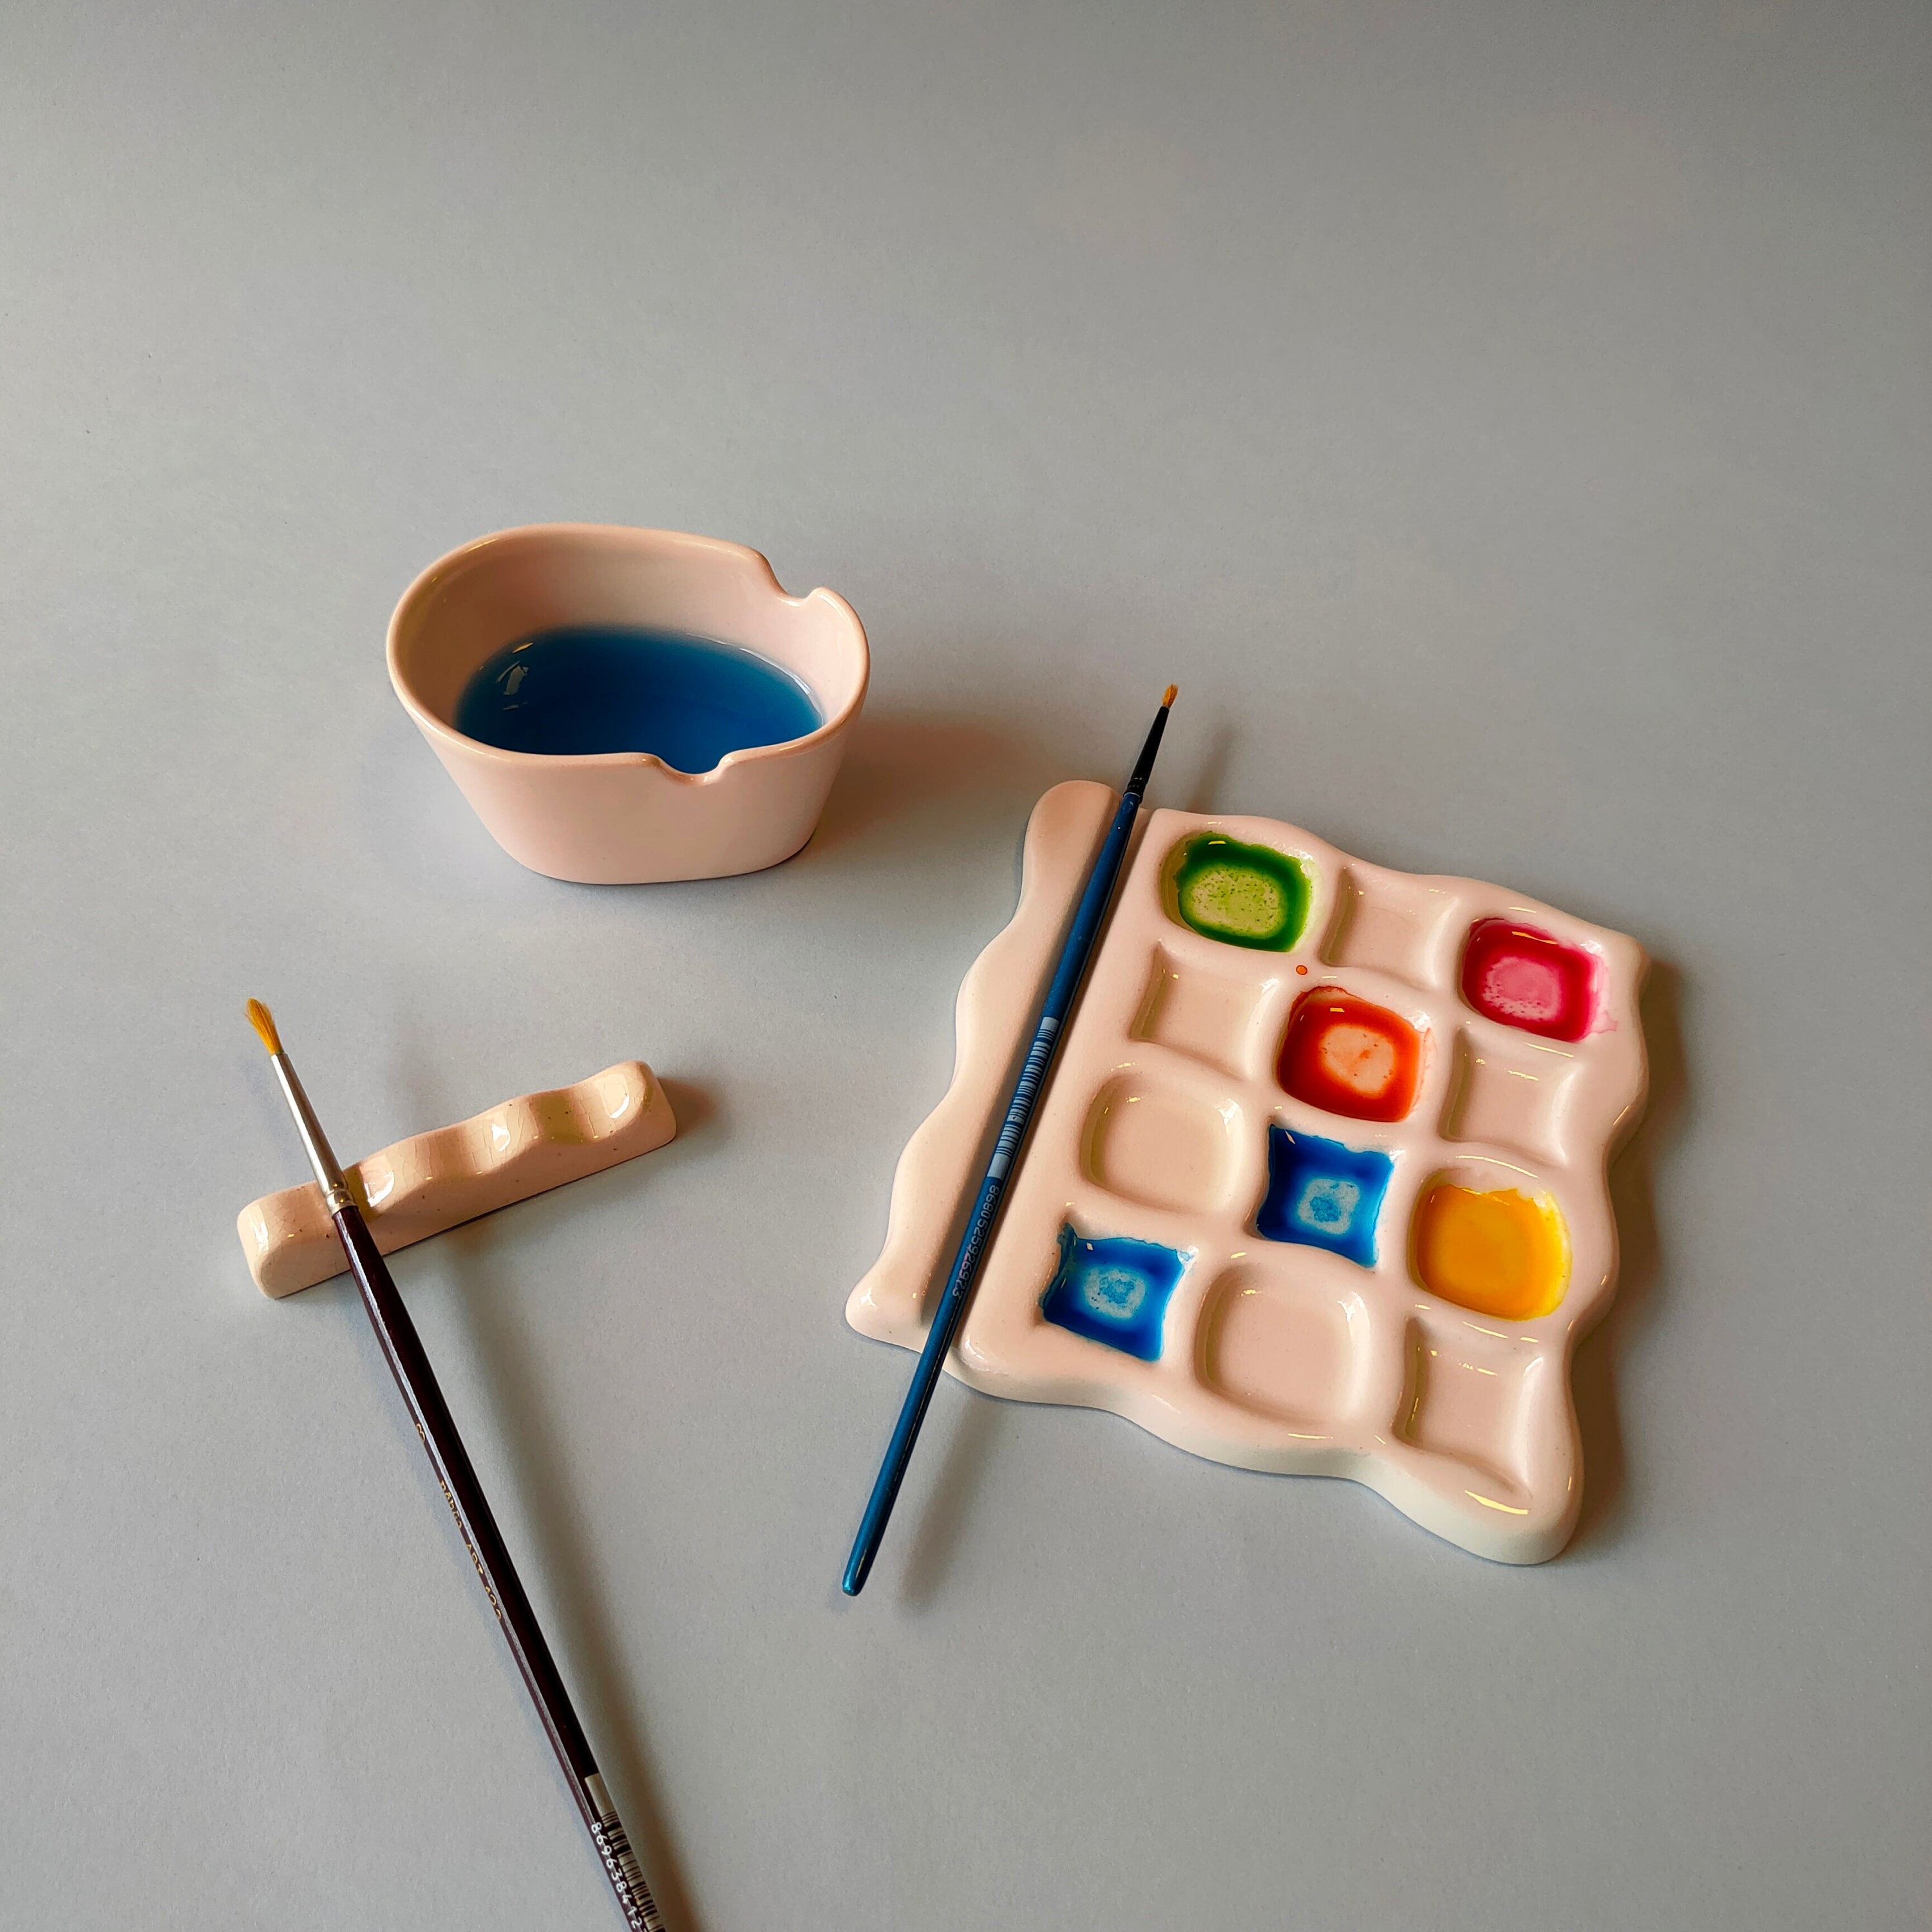 Ceramic Palette Hot Air Balloon / Small House Watercolor Palette Porcelain  Ceramic Paint Palette Palette Paint Tray